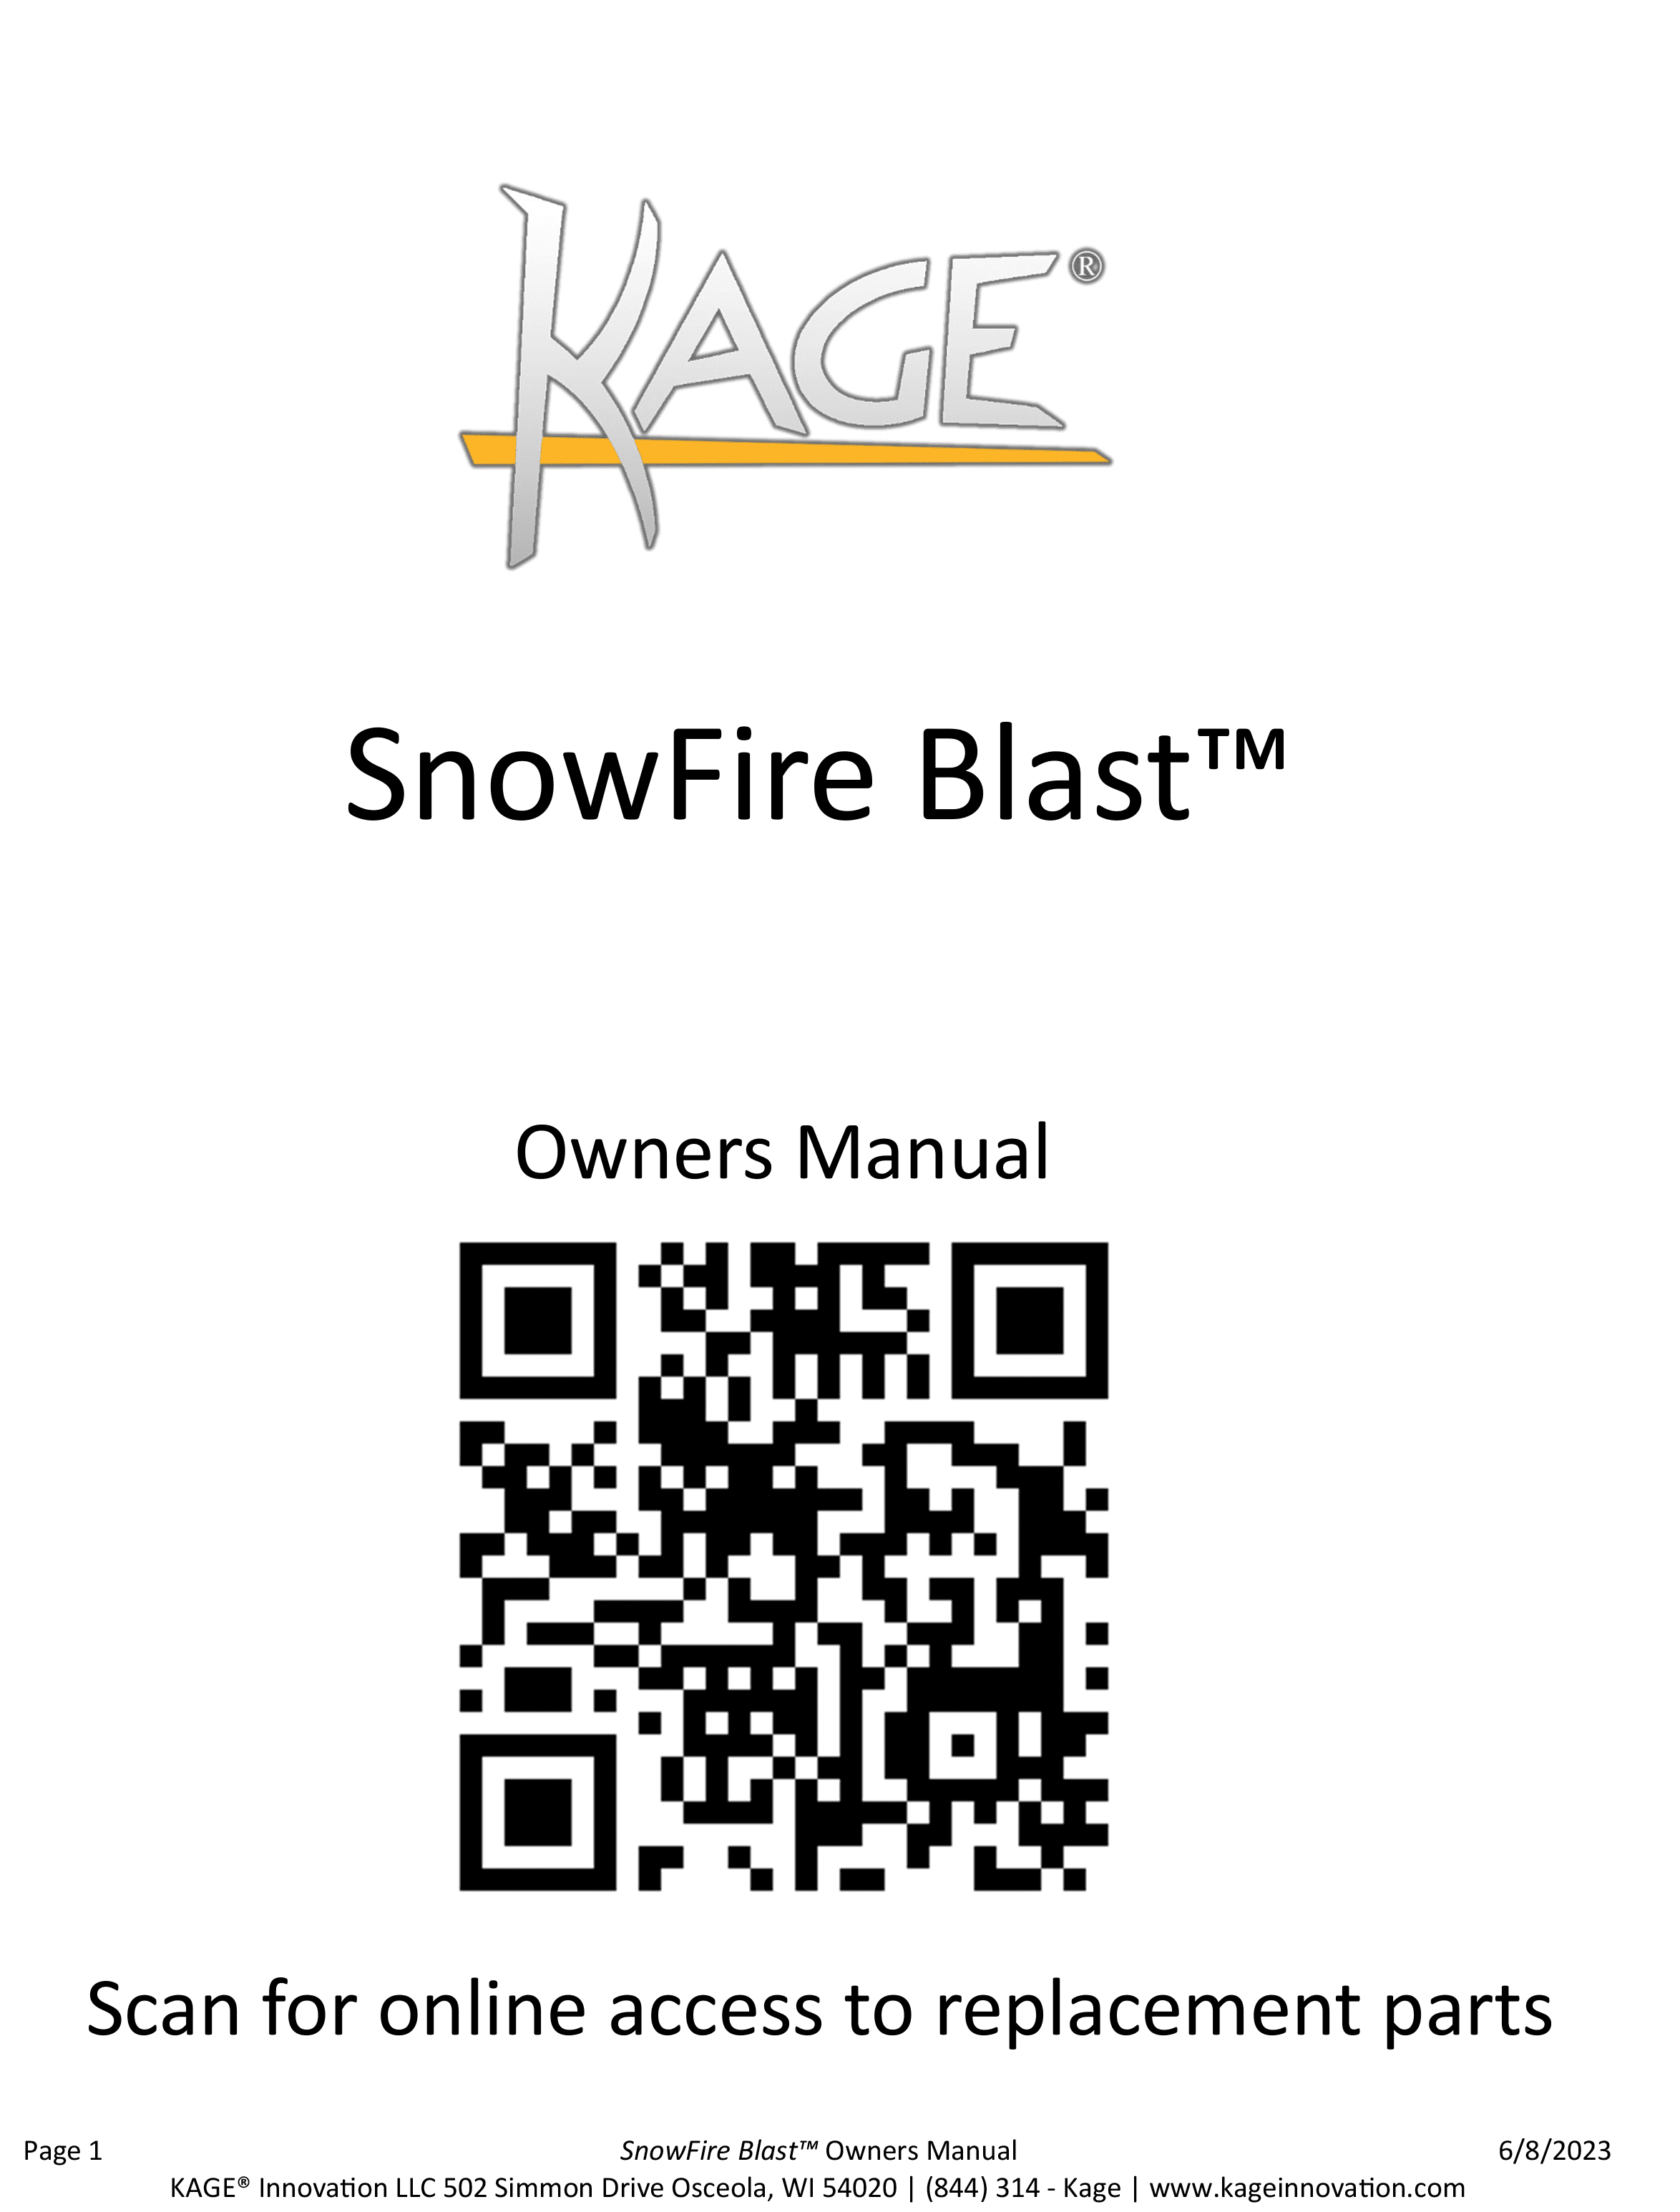 SnowFire Blast Owners Manual Cover